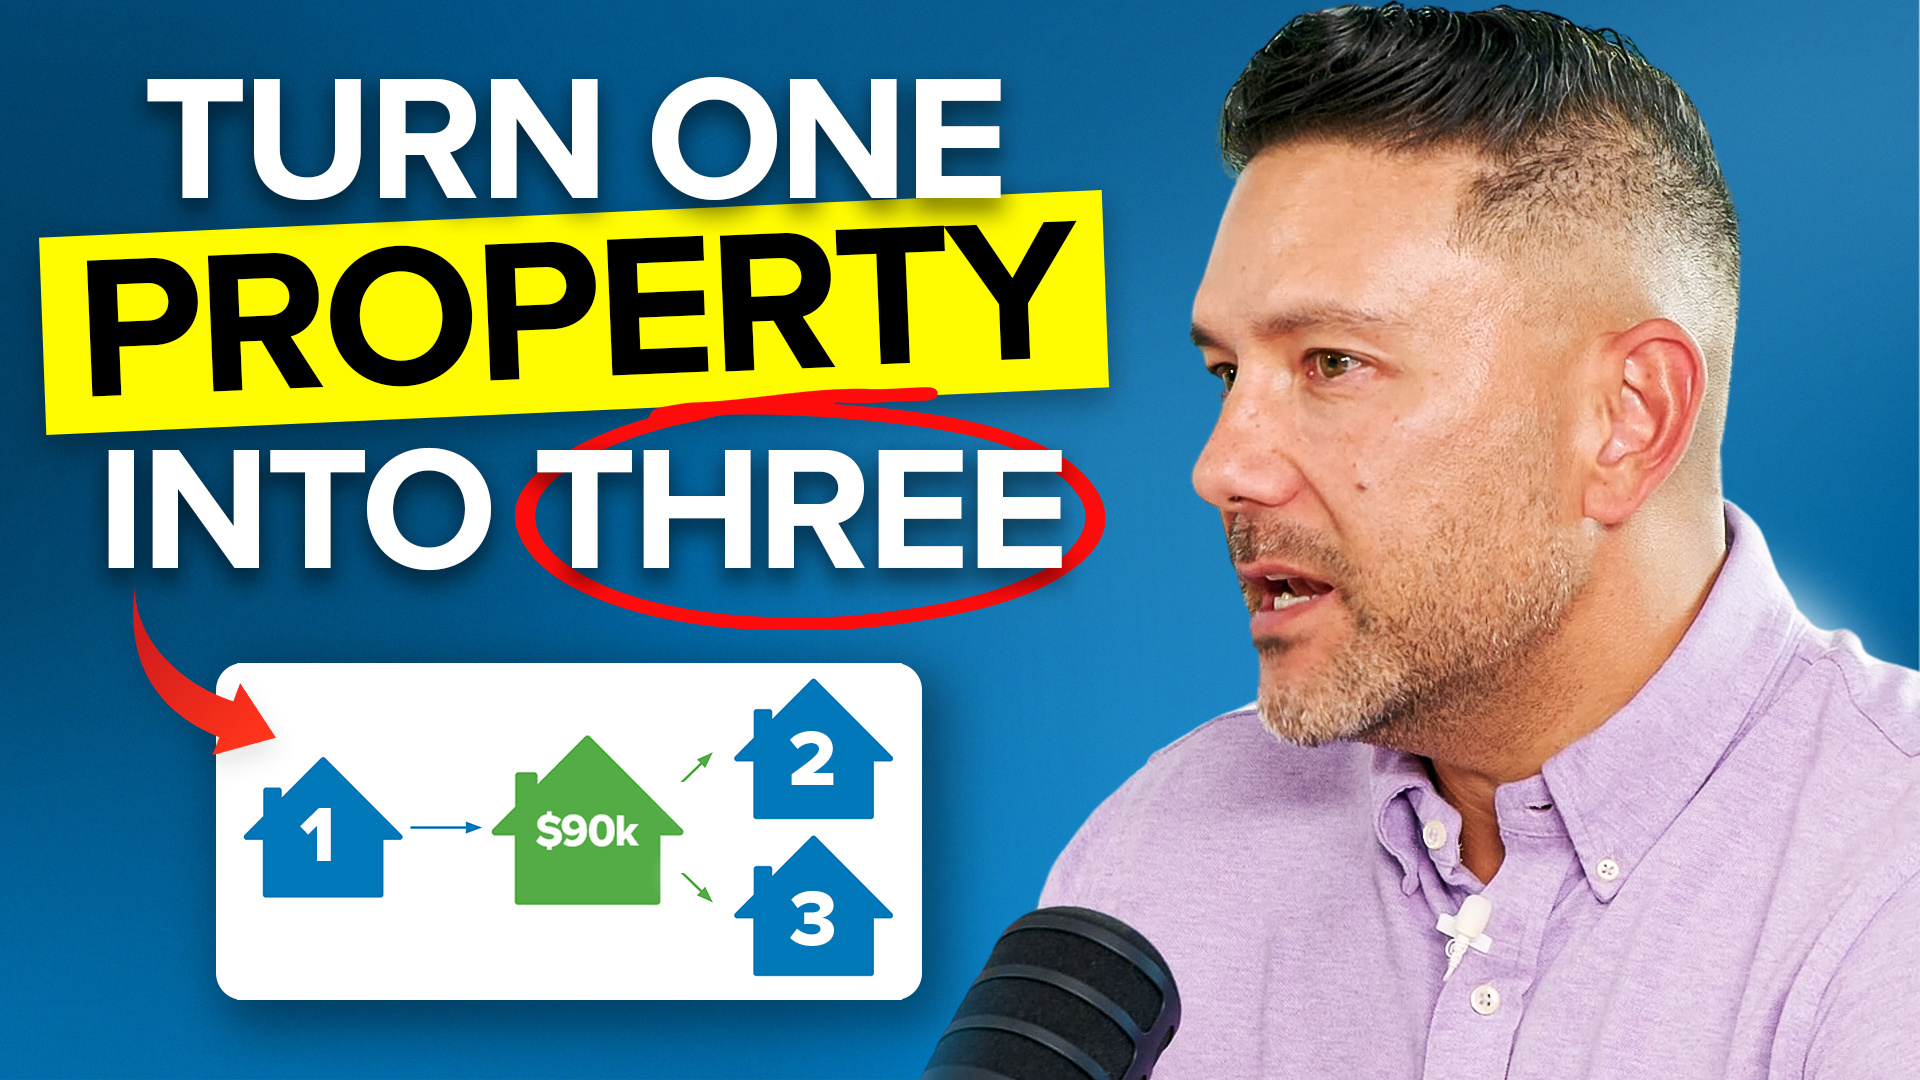 Carms_Turn One Property Into Three July 26 YT Thumbnail